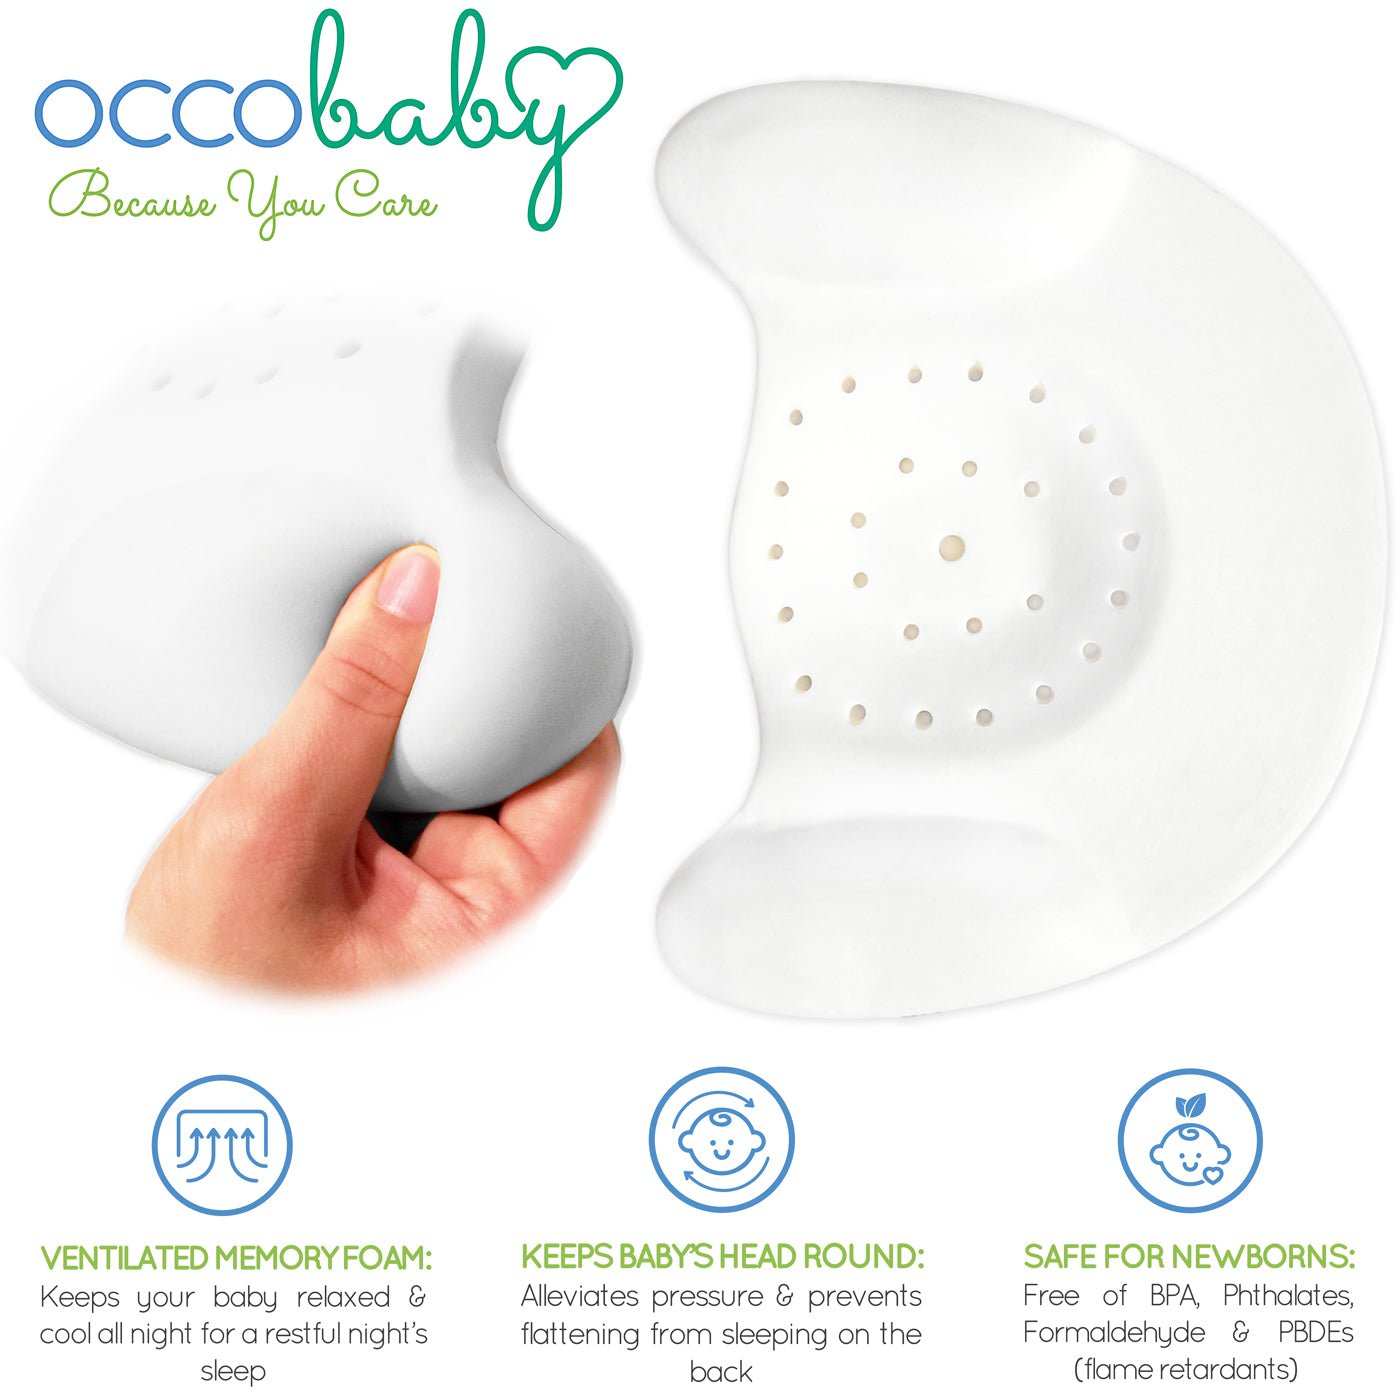 OCCObaby Head Shaping Memory Foam Pillow